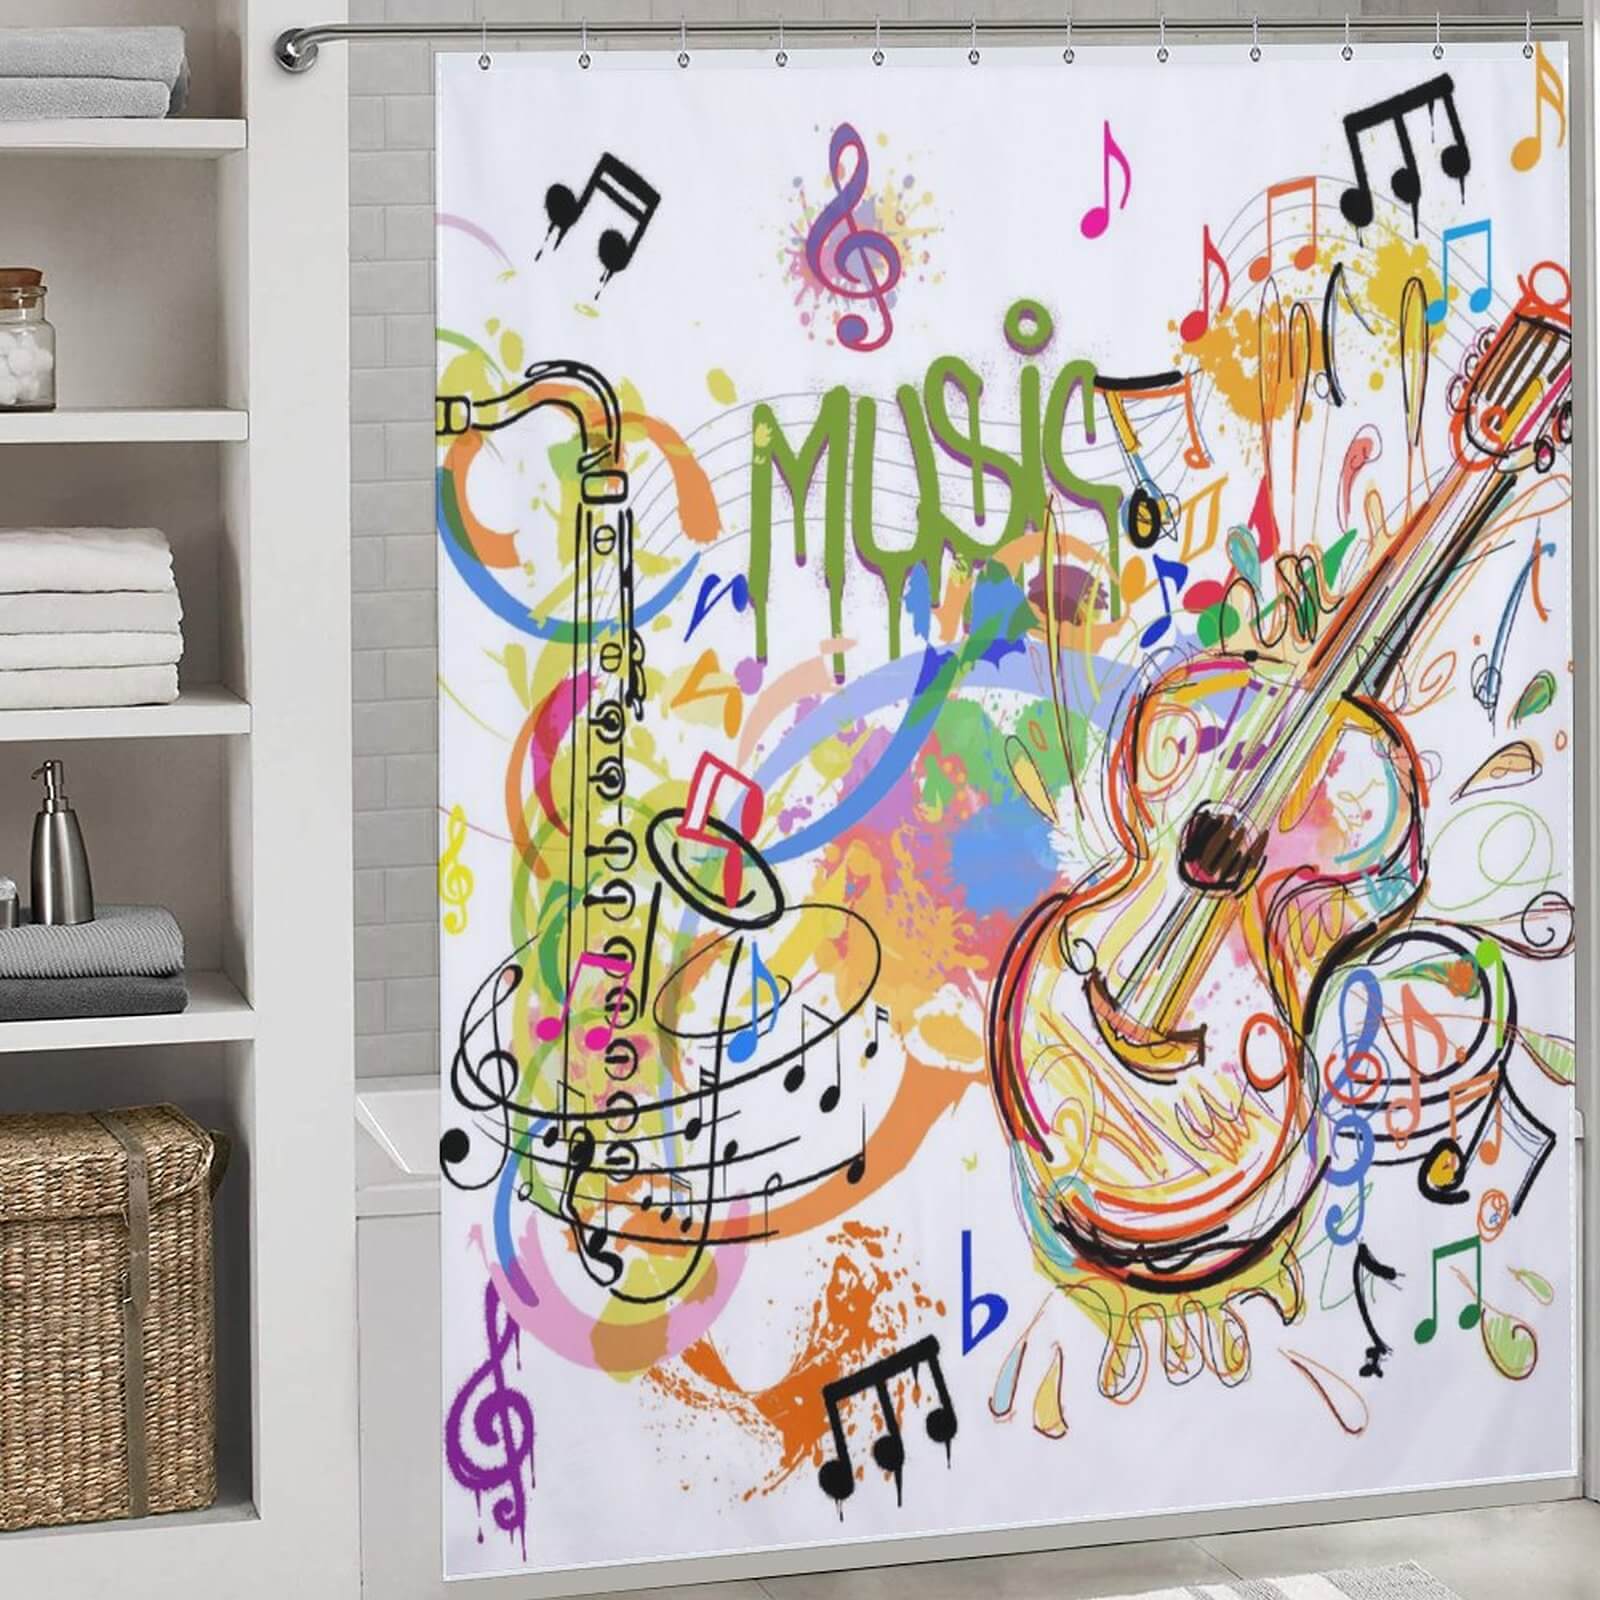 This Graffiti Music Shower Curtain-Cottoncat features graffiti-inspired music notes.